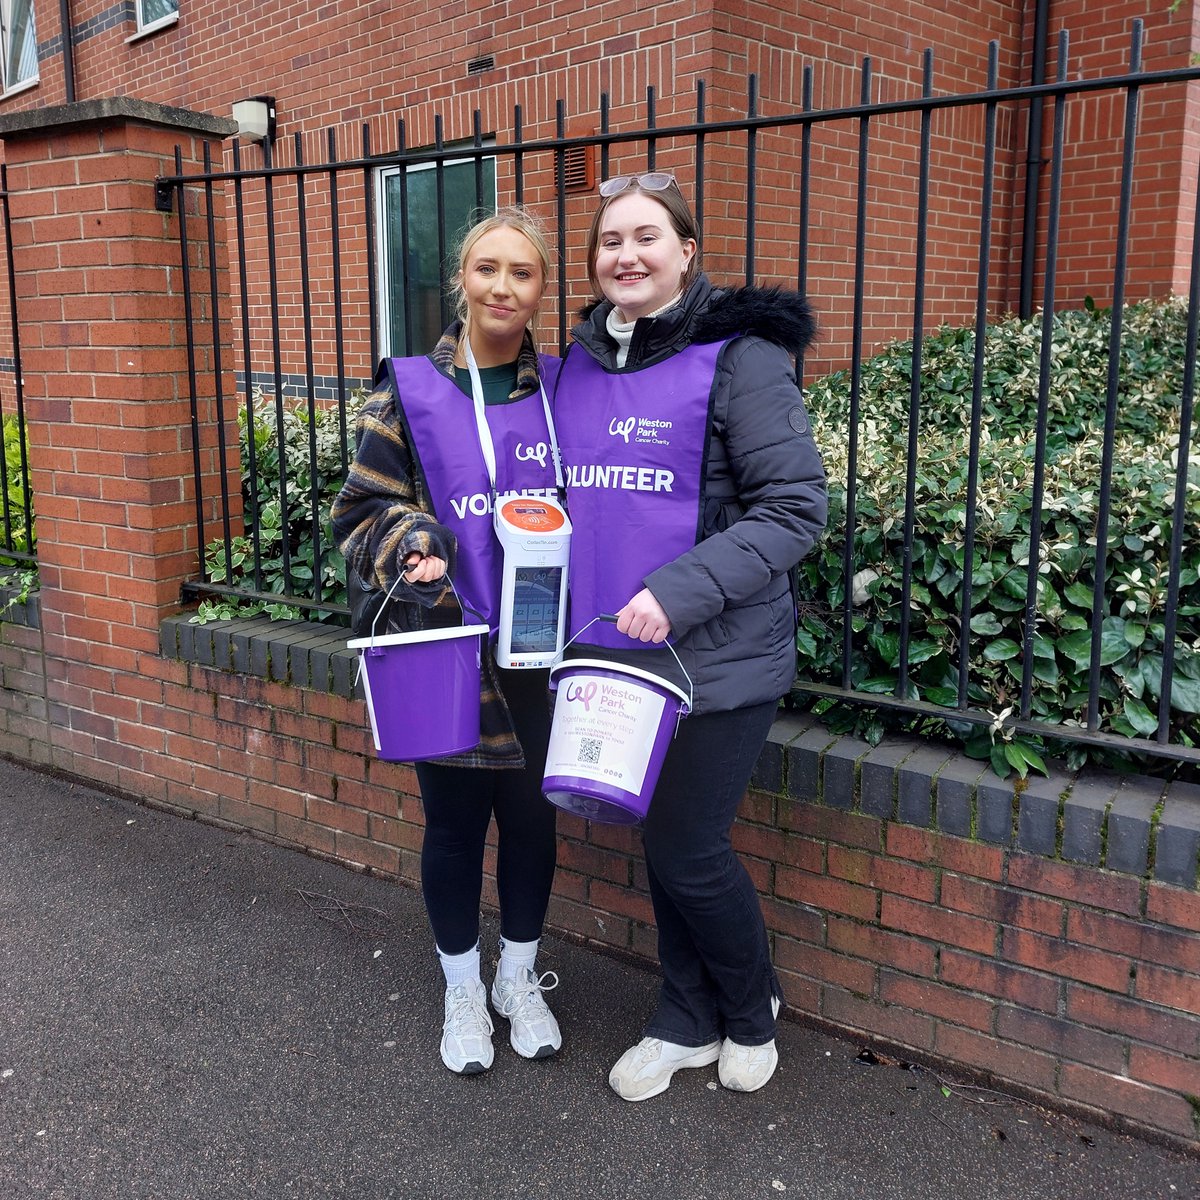 📢 Our recent @SheffieldUnited takeover day raised an amazing £3,333.06! ⚽ A HUGE thank you to the generosity of fans for donating, our wonderful volunteers for bucket collecting and @SheffieldUnited for supporting our #TogetherAtEveryStep partnership 💜 #ForTheOneInTwo